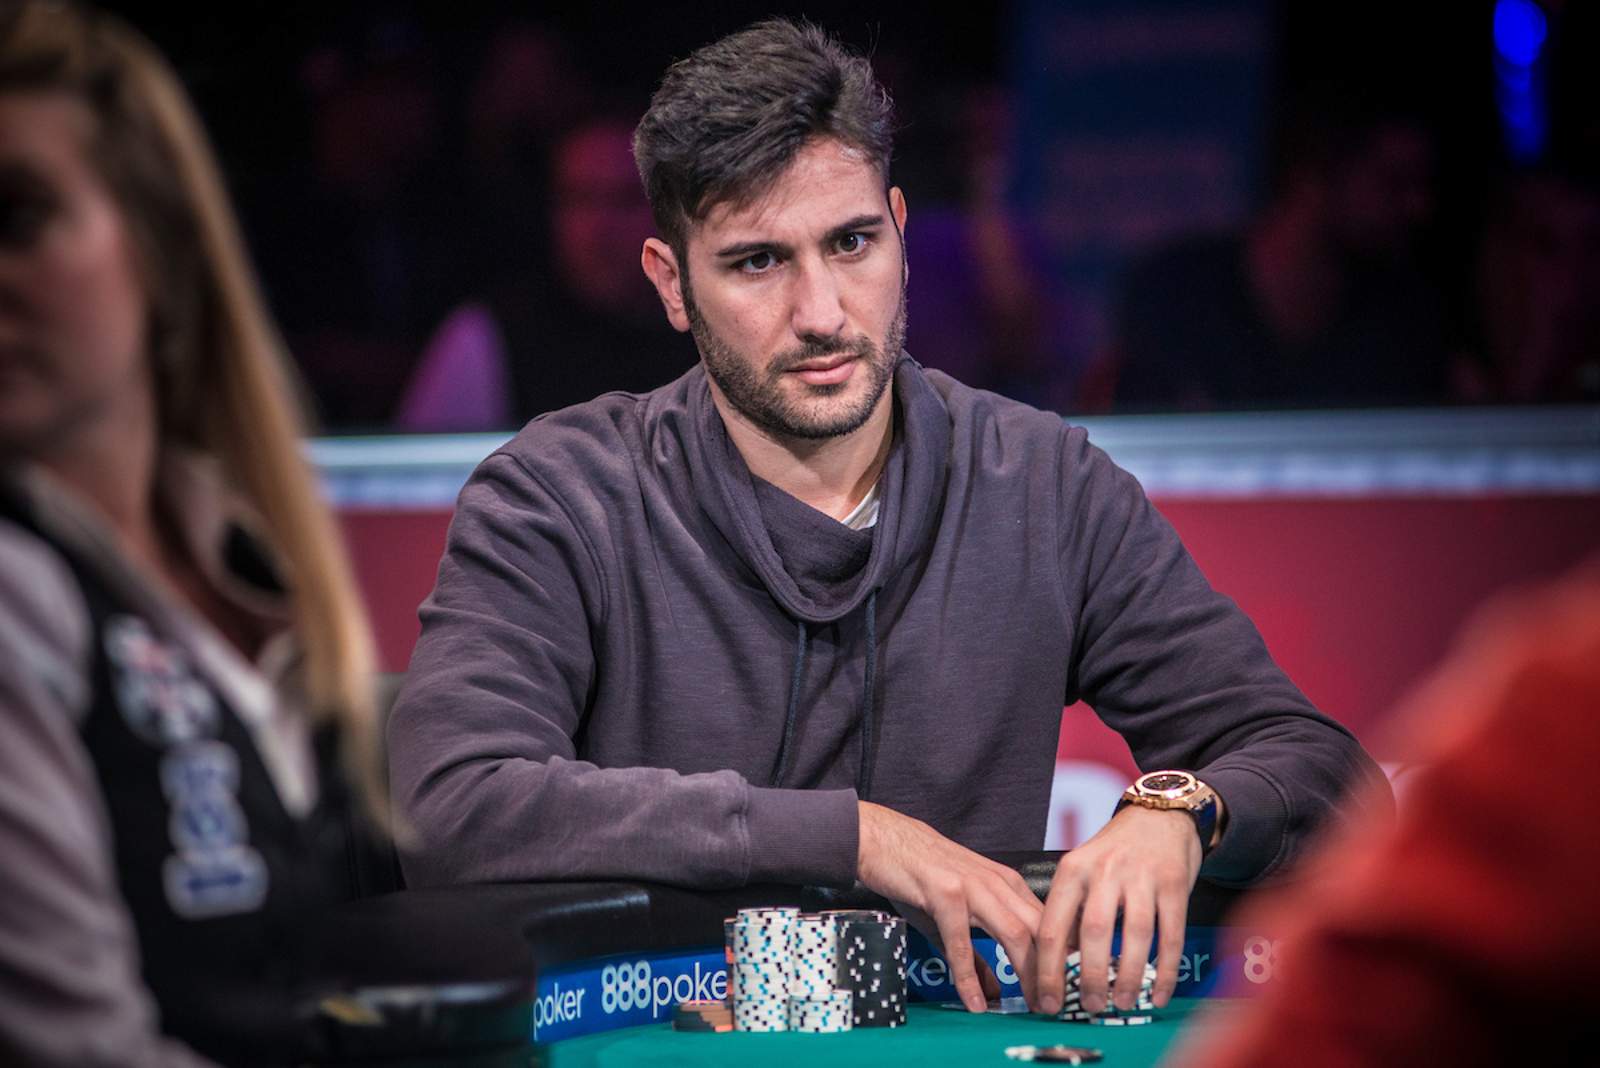 "Big Names" Held Off WSOP POY Leader Board...For Now